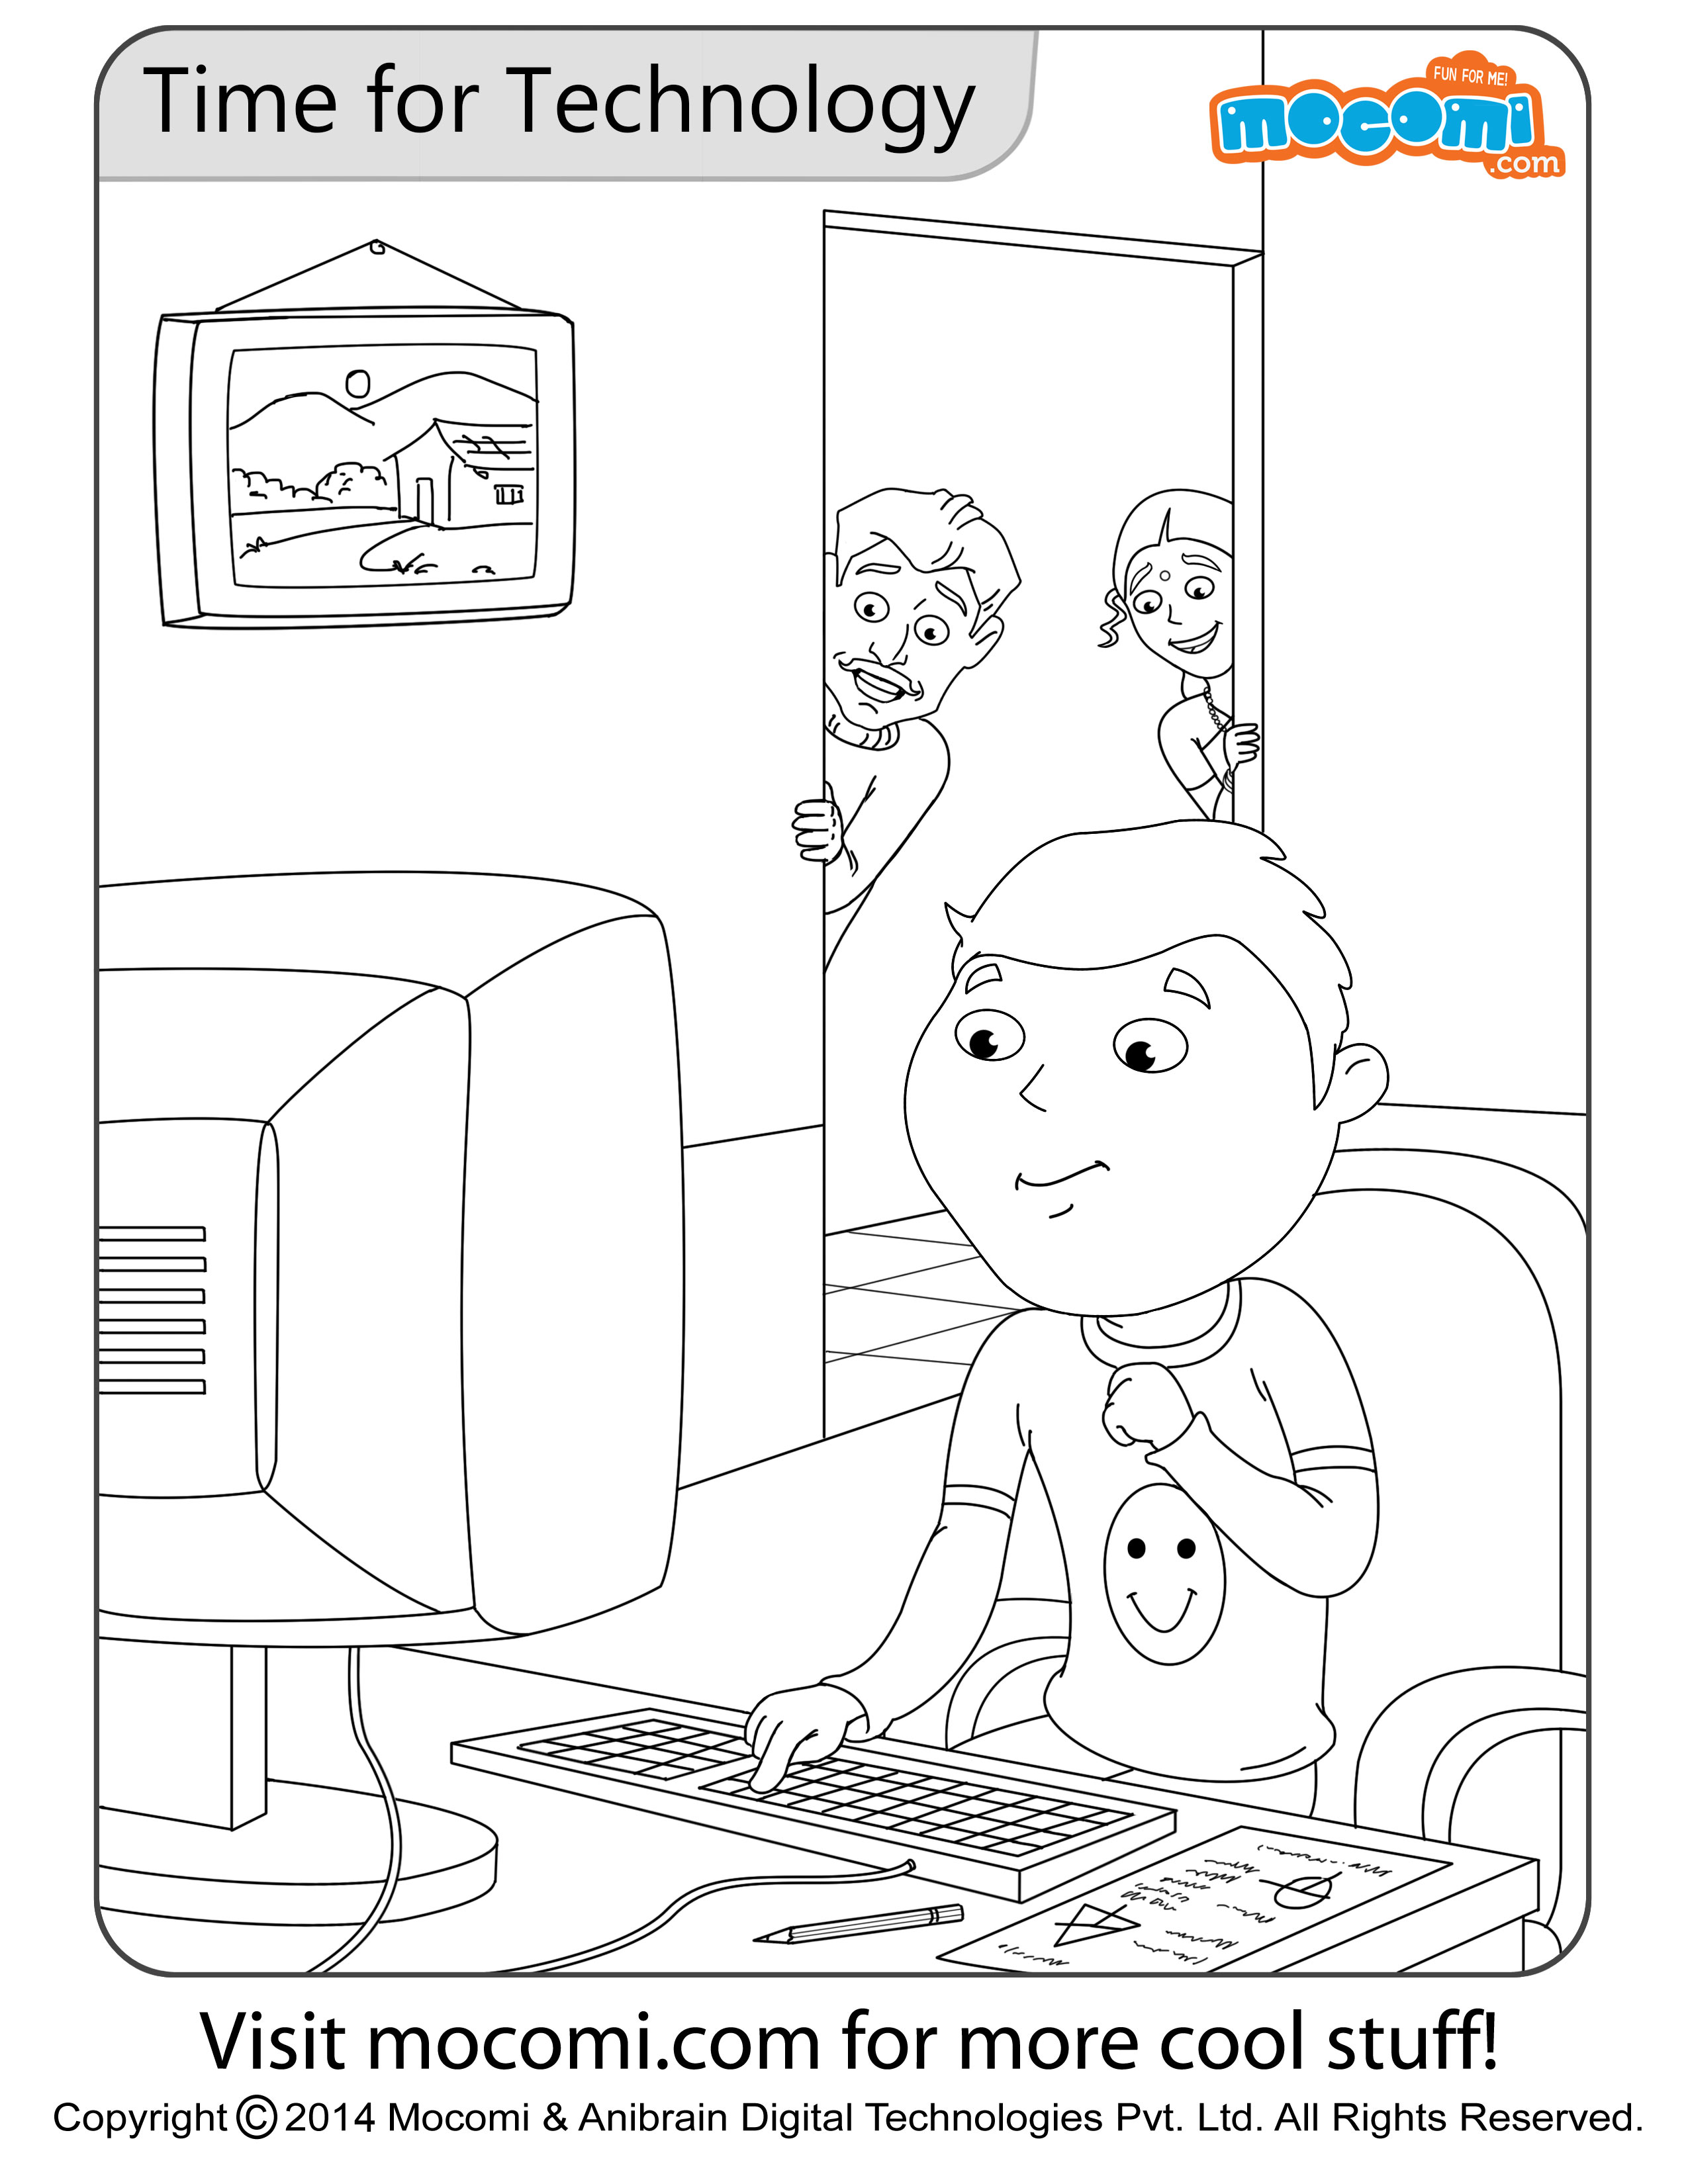 Time for Technology – Colouring Page